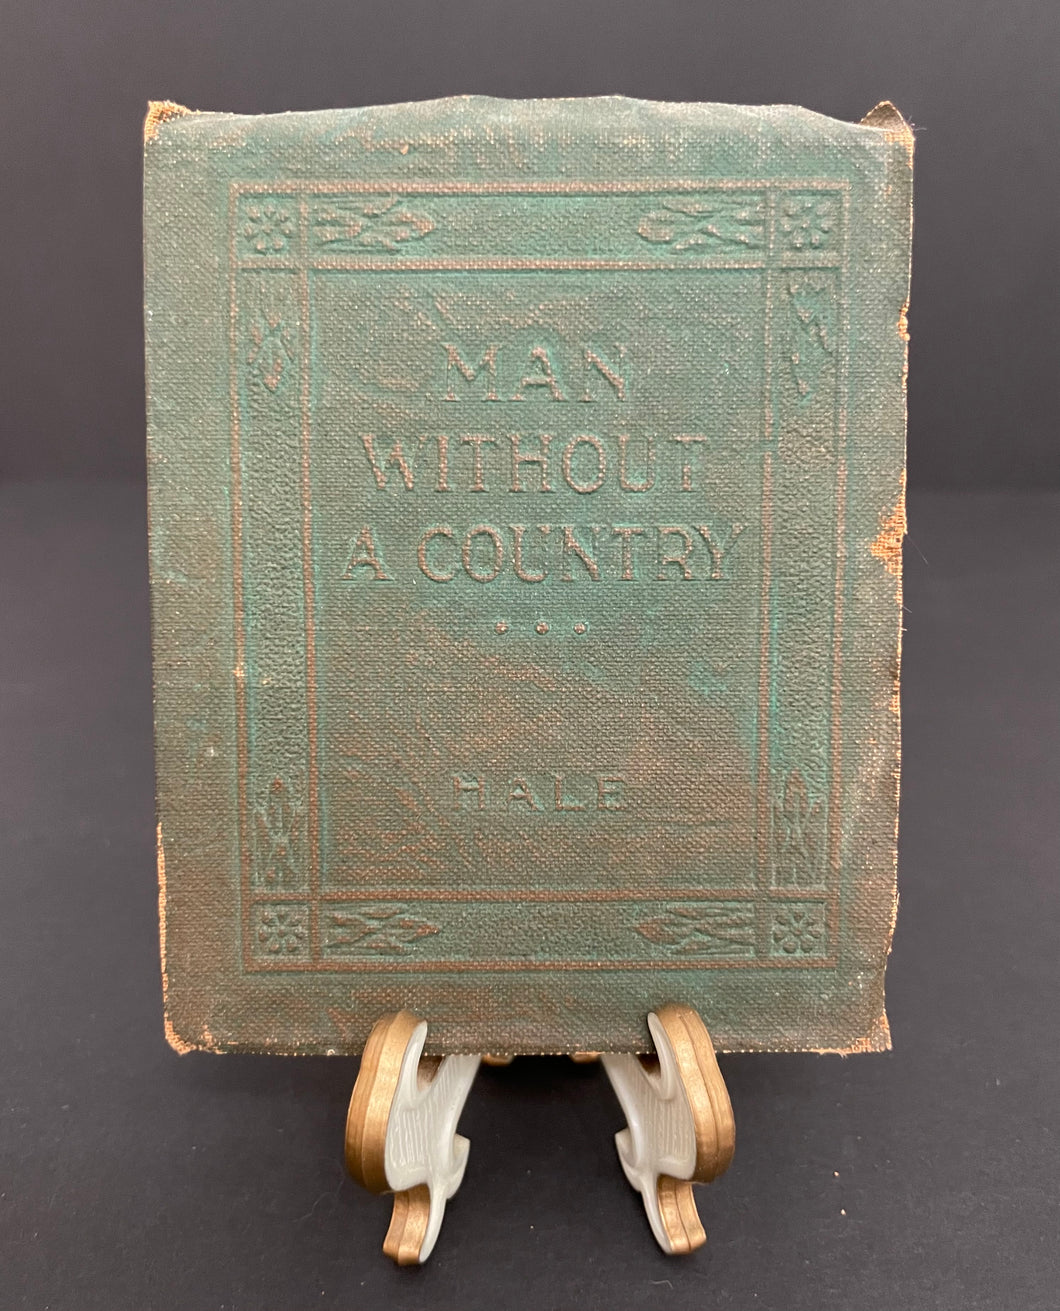 Antique Little Leather Library “Man Without A Country” by Hale